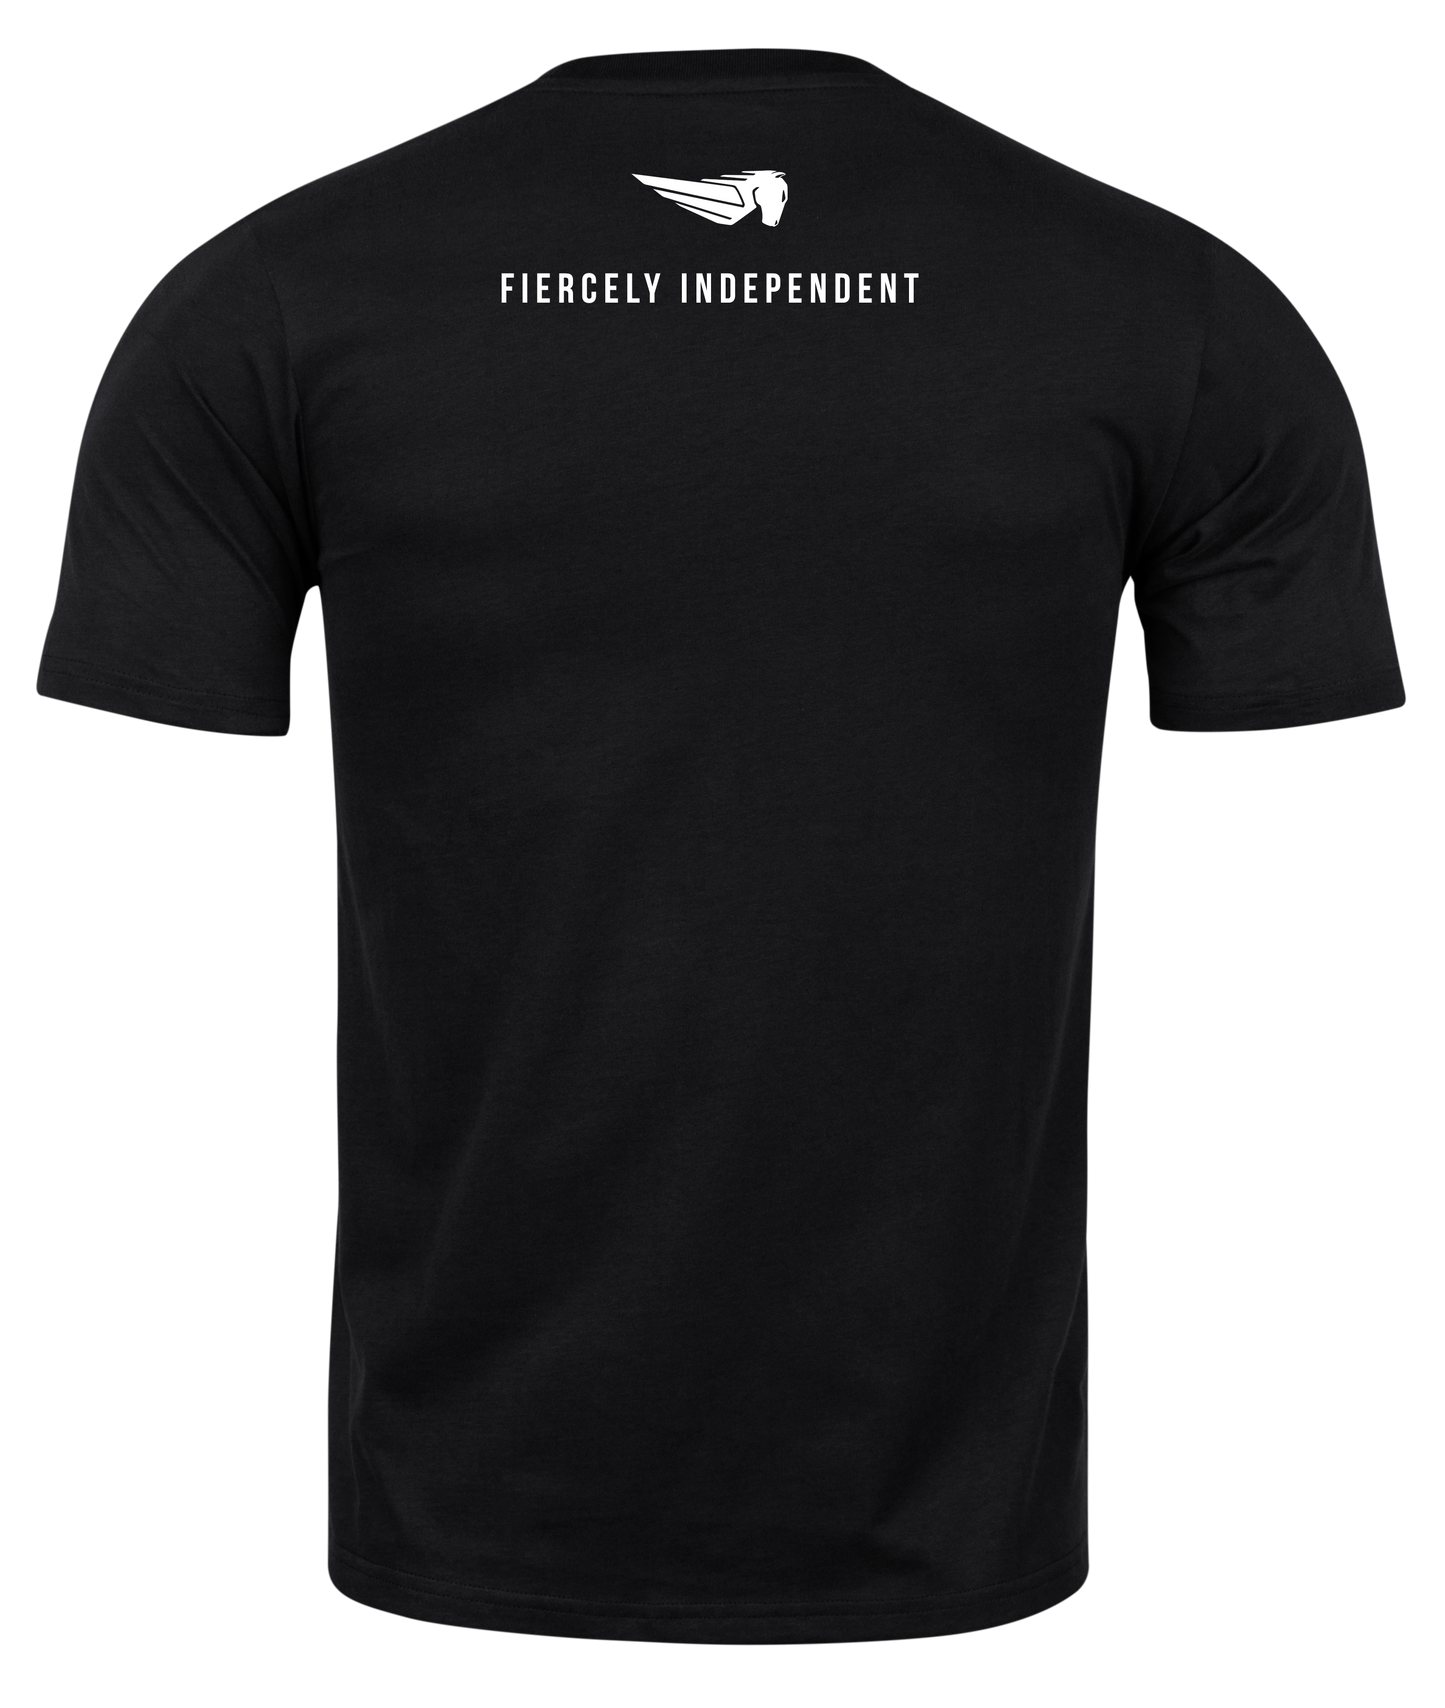 Fiercely Independent Buell Tee